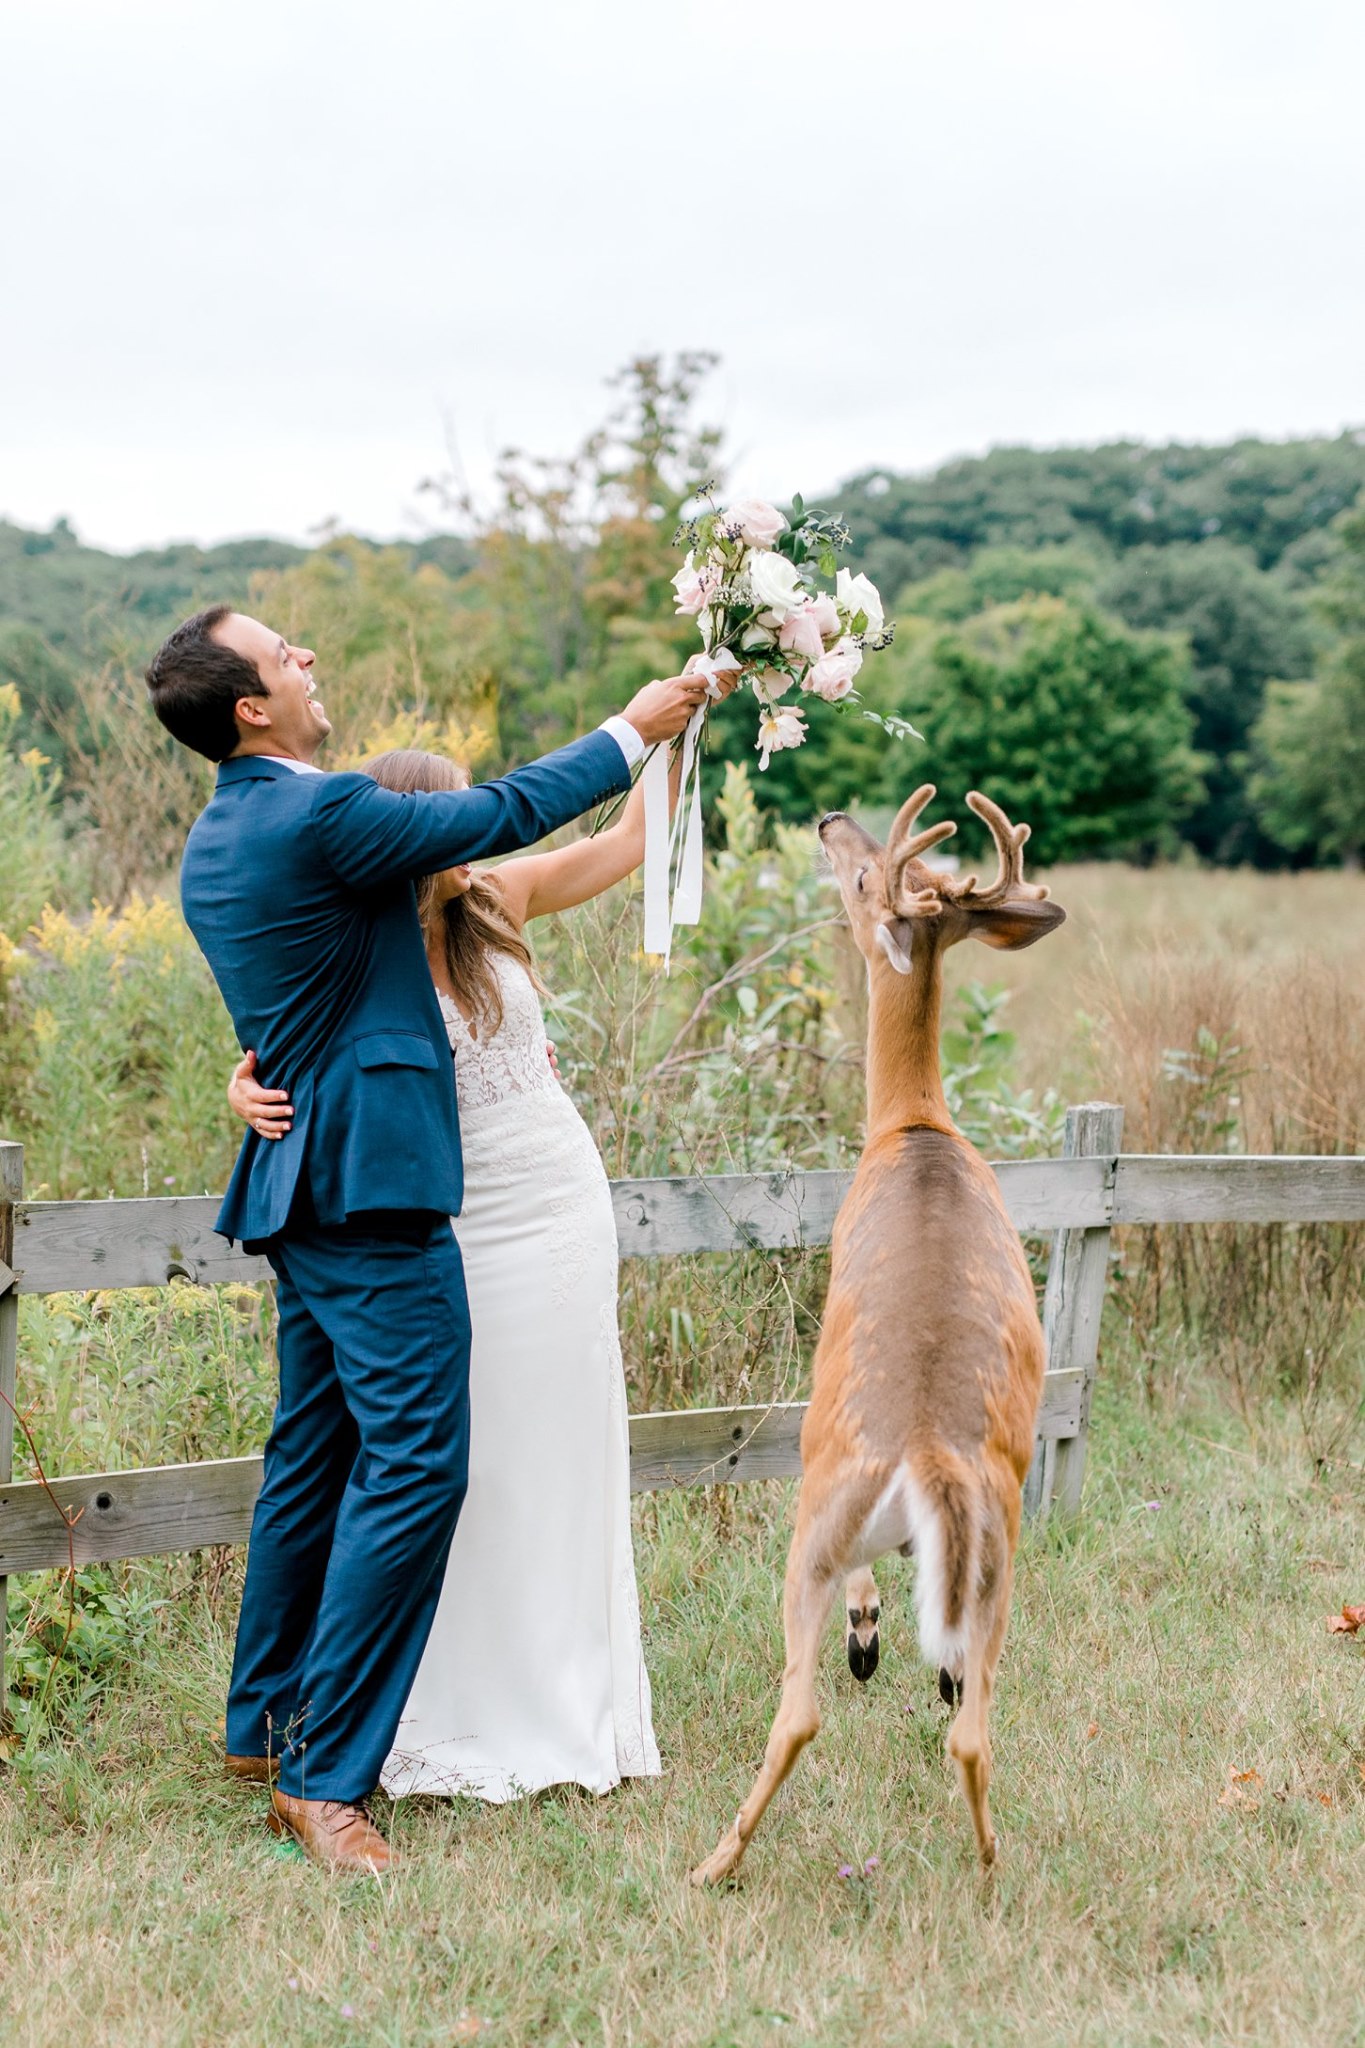 PHOTO: Morgan and Luke Mackley were surprised by a deer while their wedding photos were being taken.